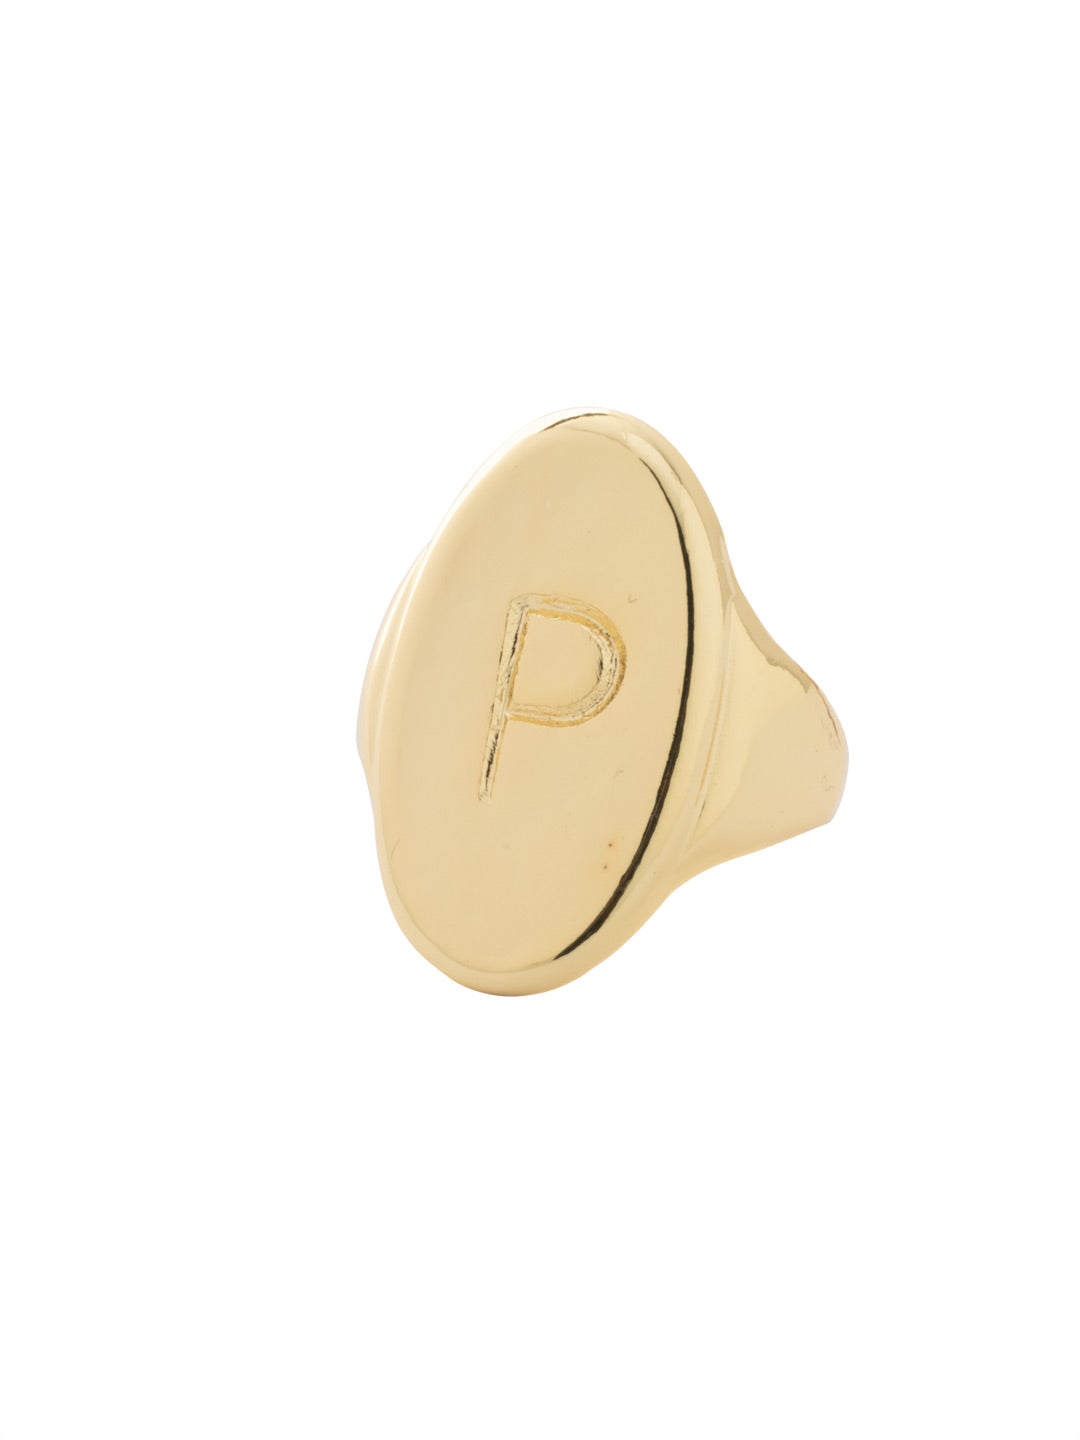 "P" Signet Statement Ring - RFK45BGMTL - <p>The Signet Statement Ring features a capital letter stamped into an oblong metal disk on an adjustable ring band. From Sorrelli's Bare Metallic collection in our Bright Gold-tone finish.</p>